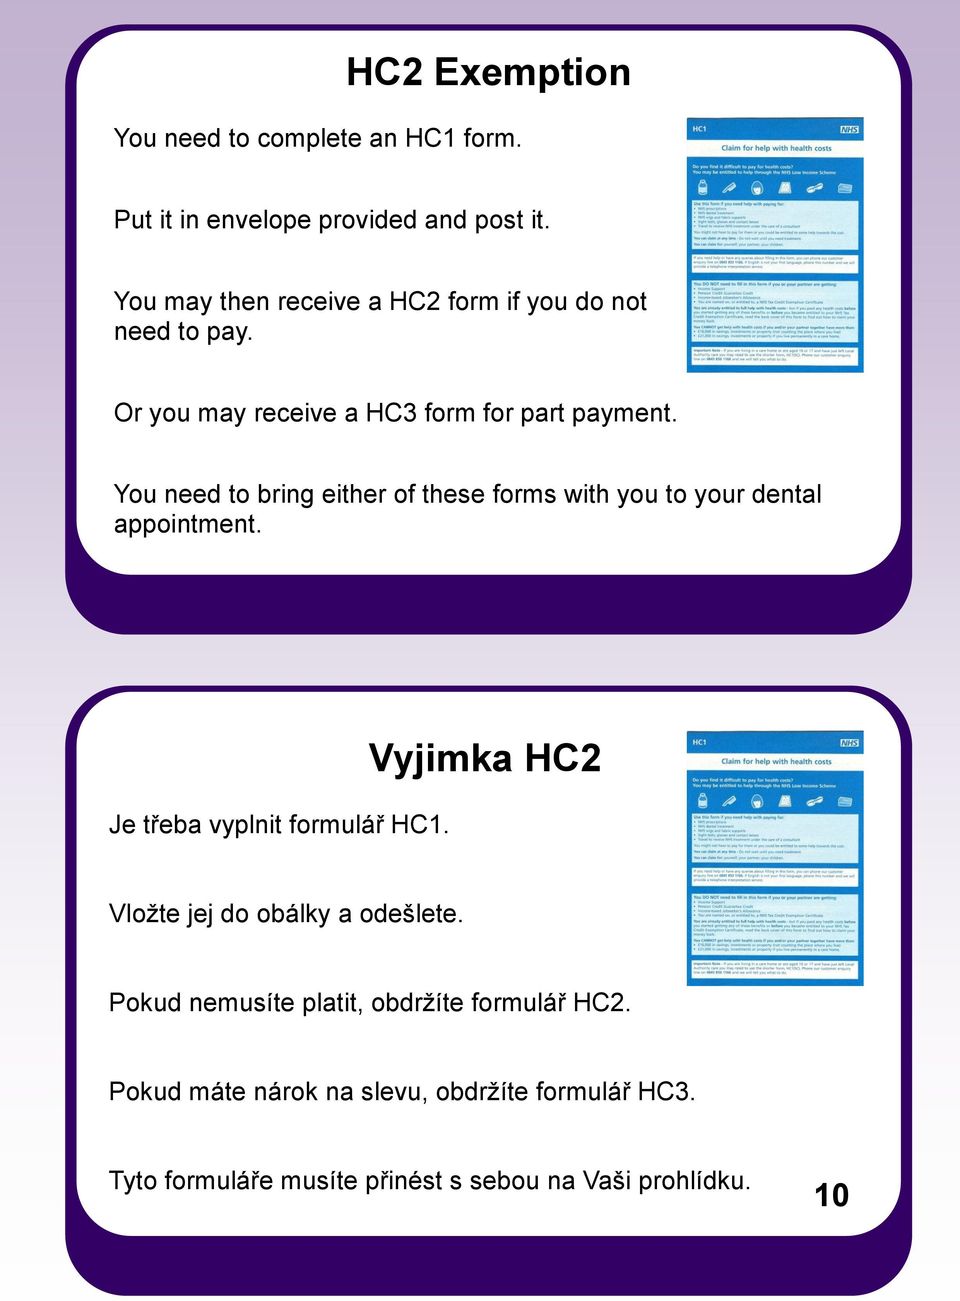 You need to bring either of these forms with you to your dental appointment. Je třeba vyplnit formulář HC1.